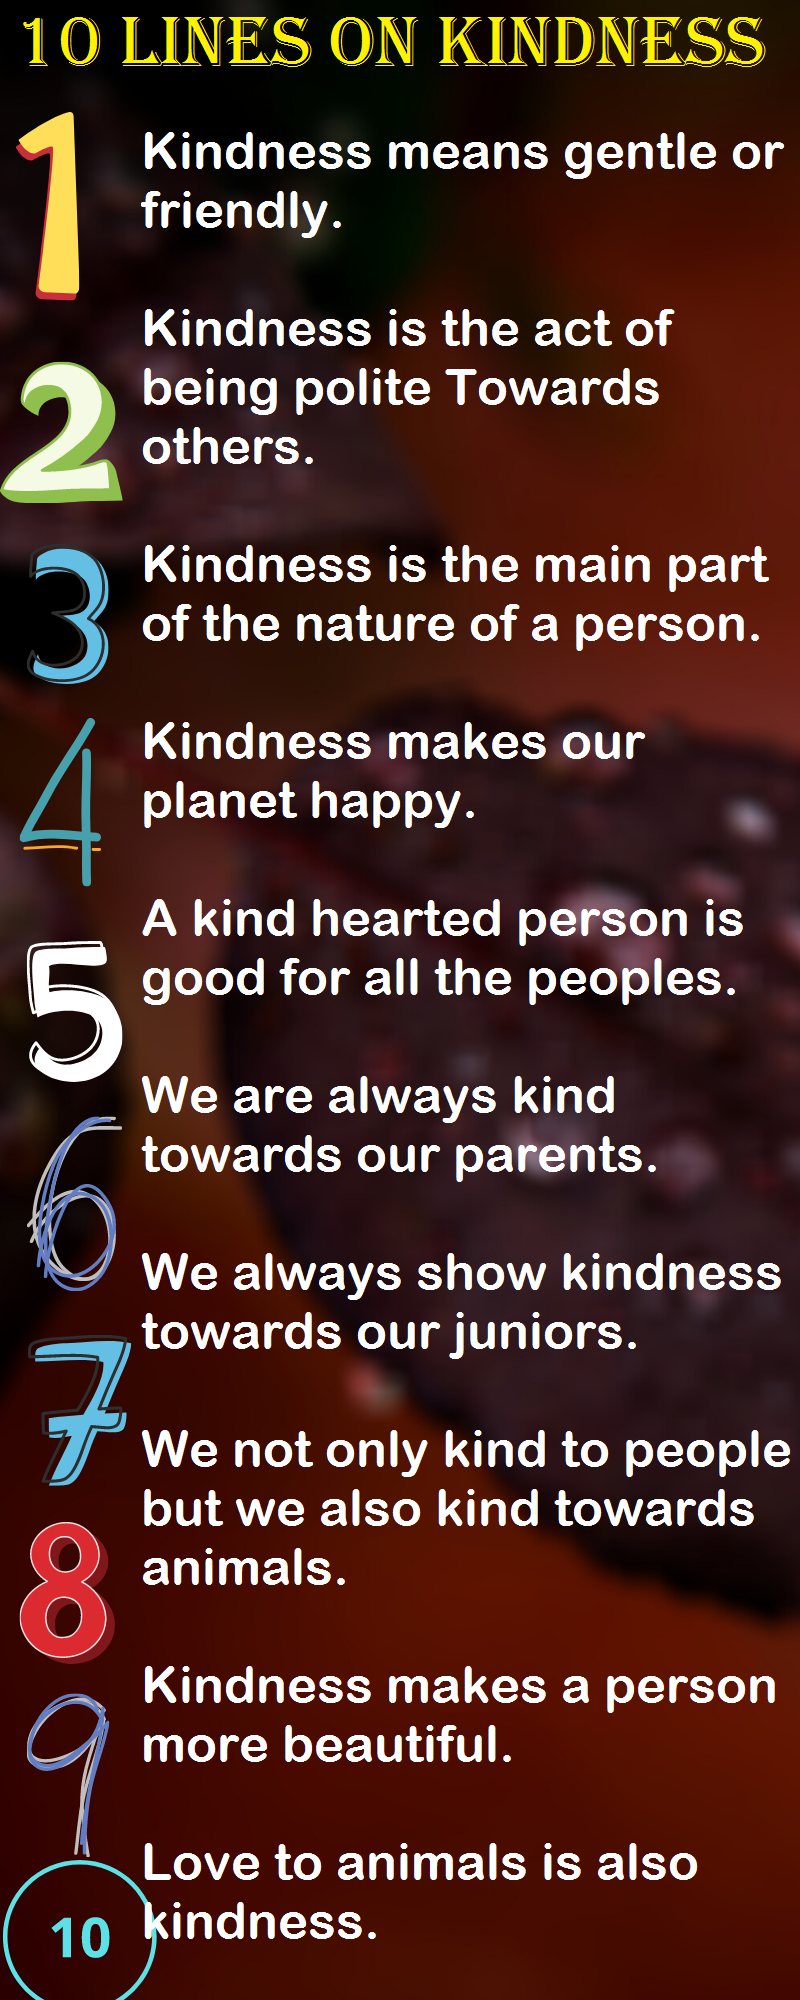 how to show kindness to others essay